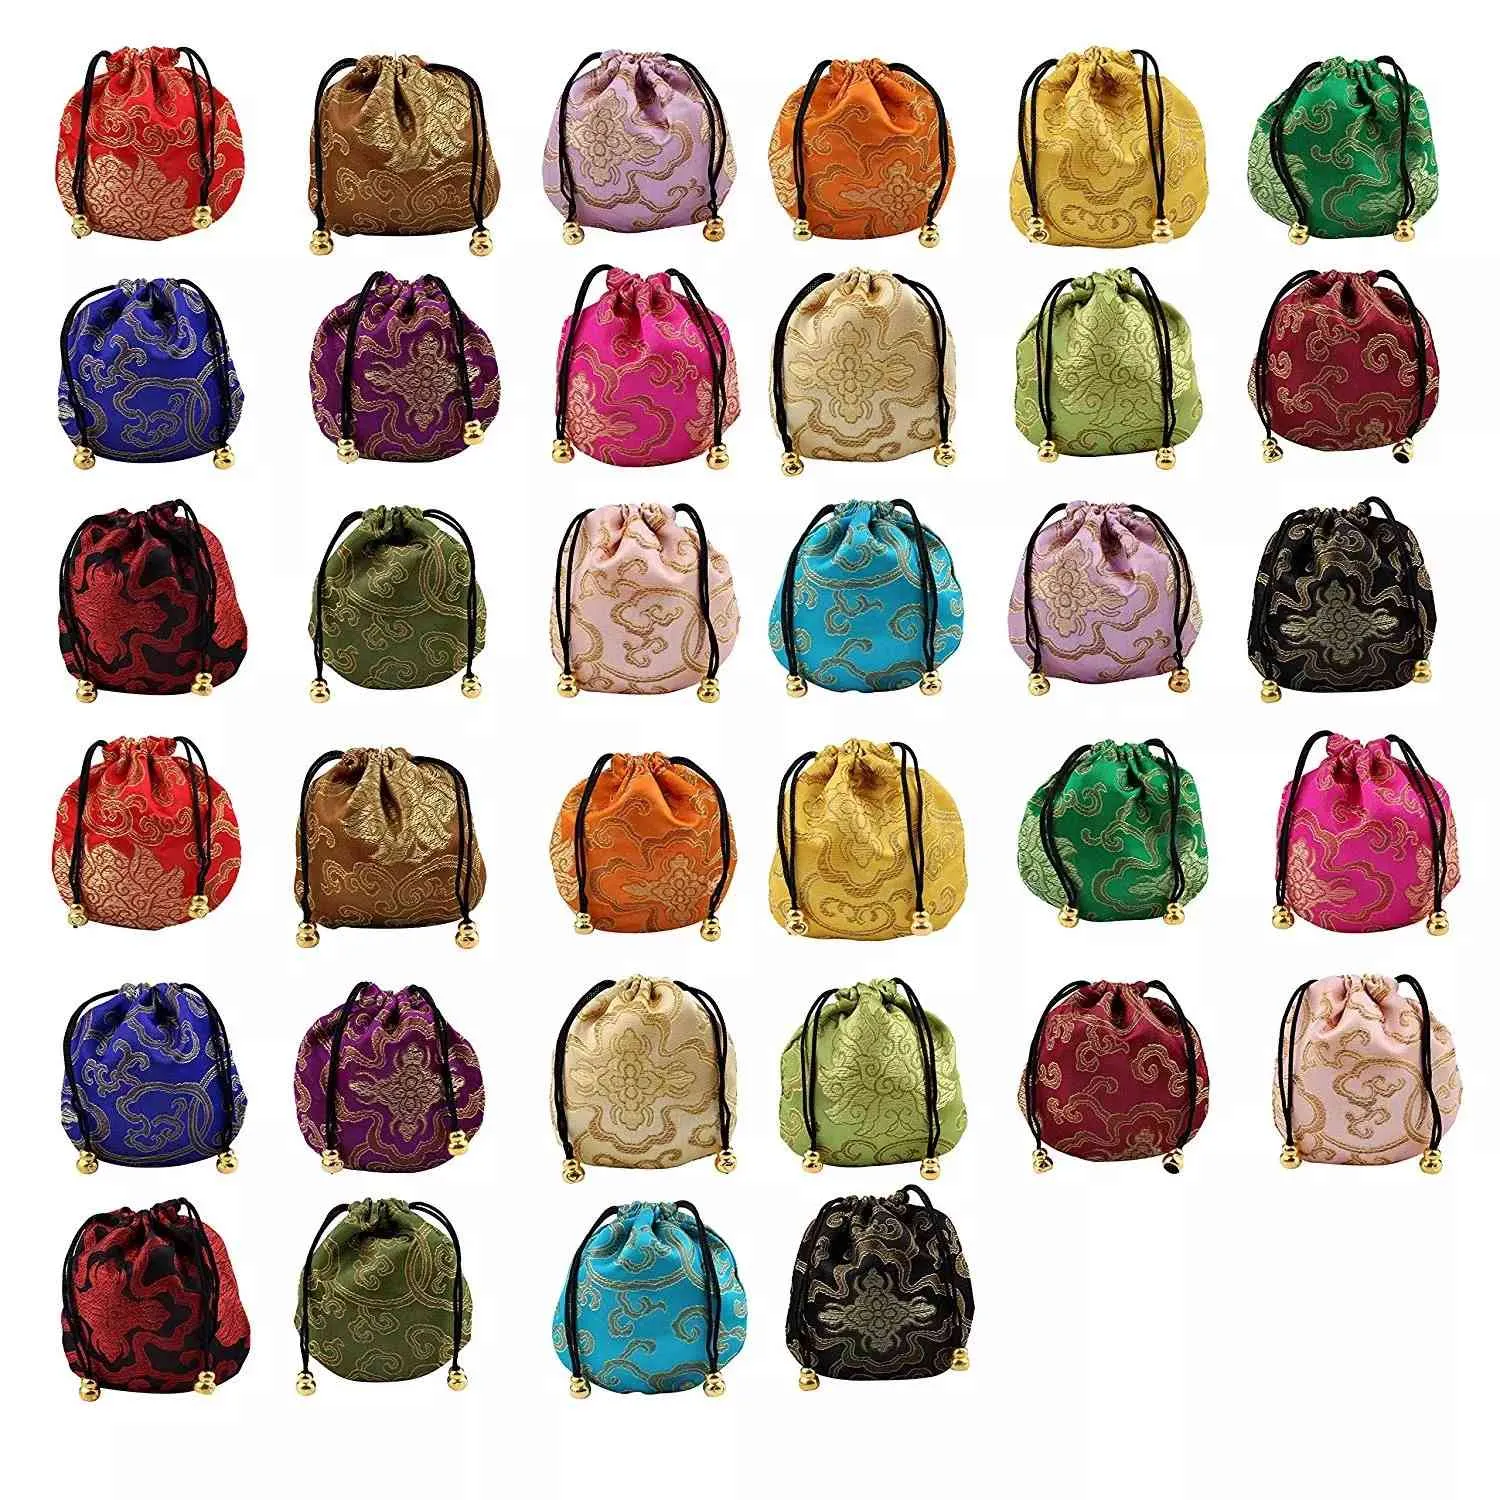 24pcs Silk Jewelry Pouch Small Satin Coin Purse Chinese Brocade Embroidered Drawstring Gift Bag for Ring / Earring